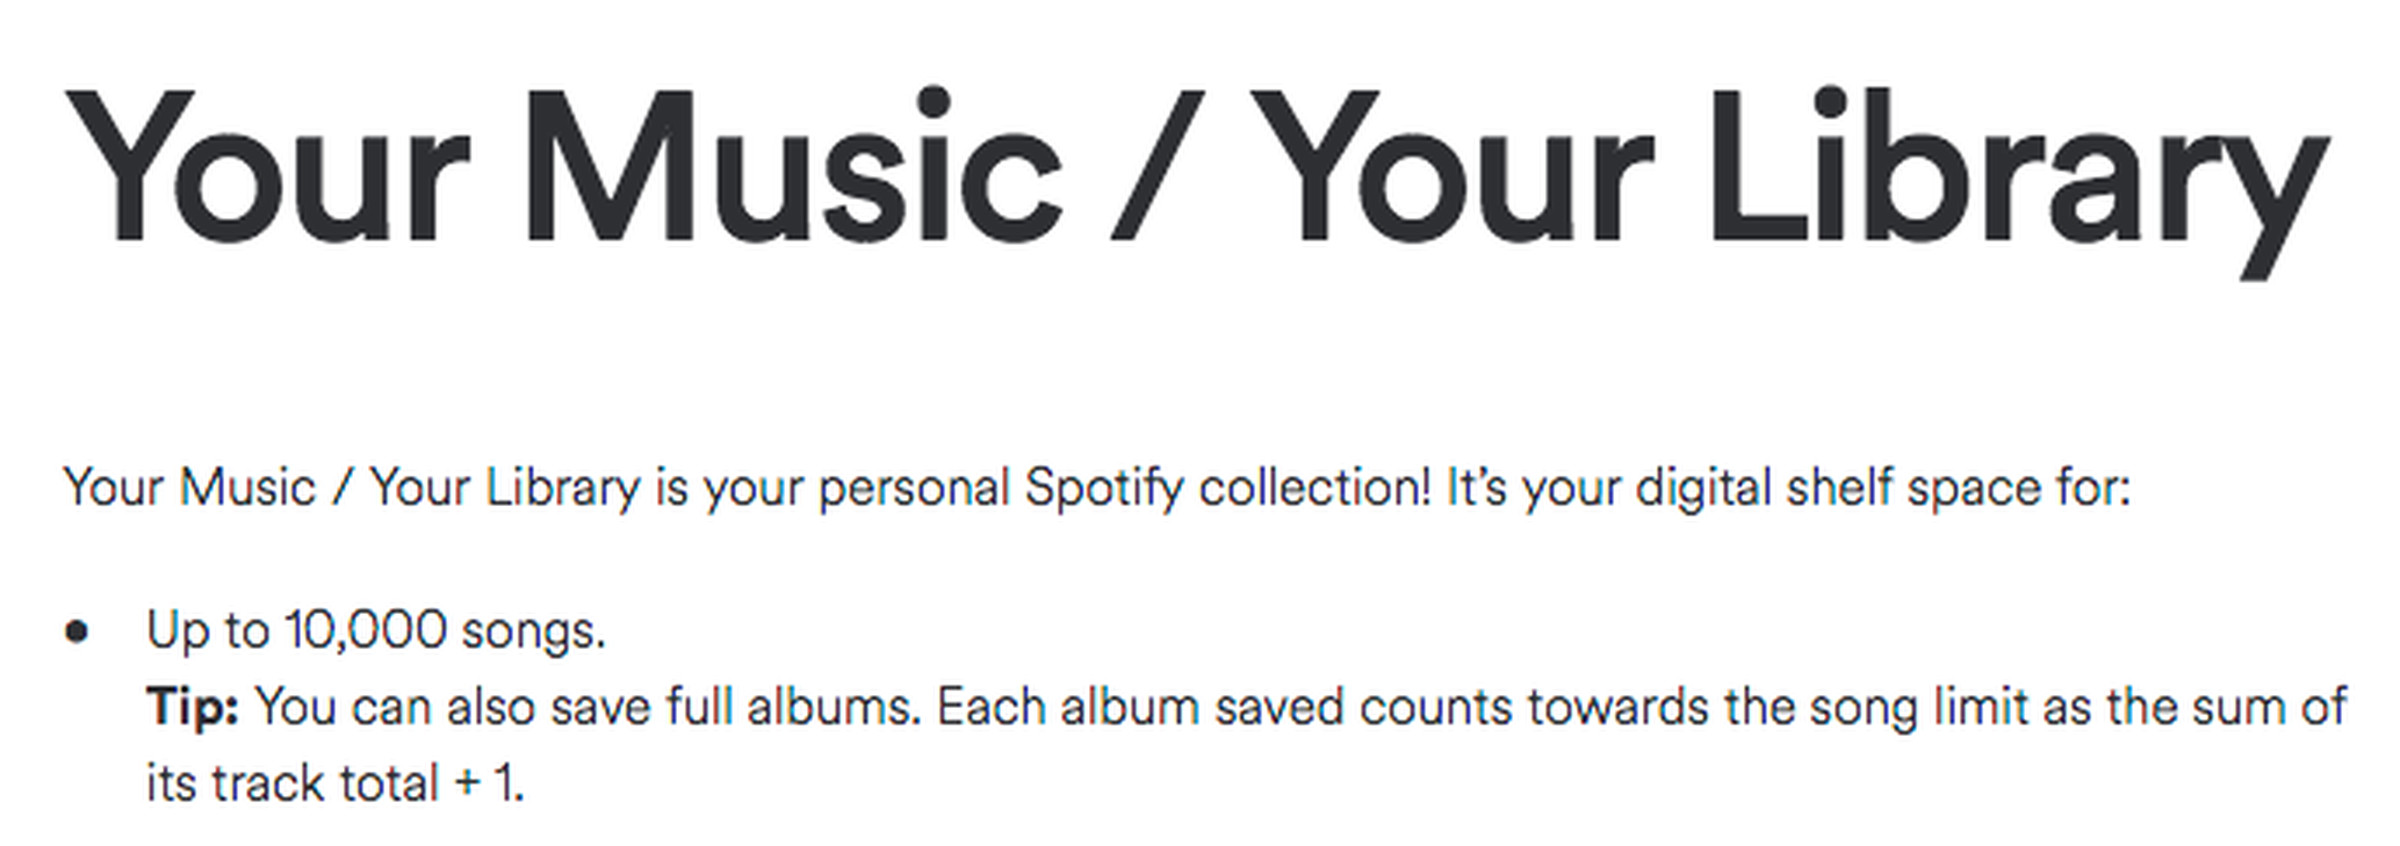 Bizarrely, for every album you add to your library, an extra track gets counted toward your total song limit.